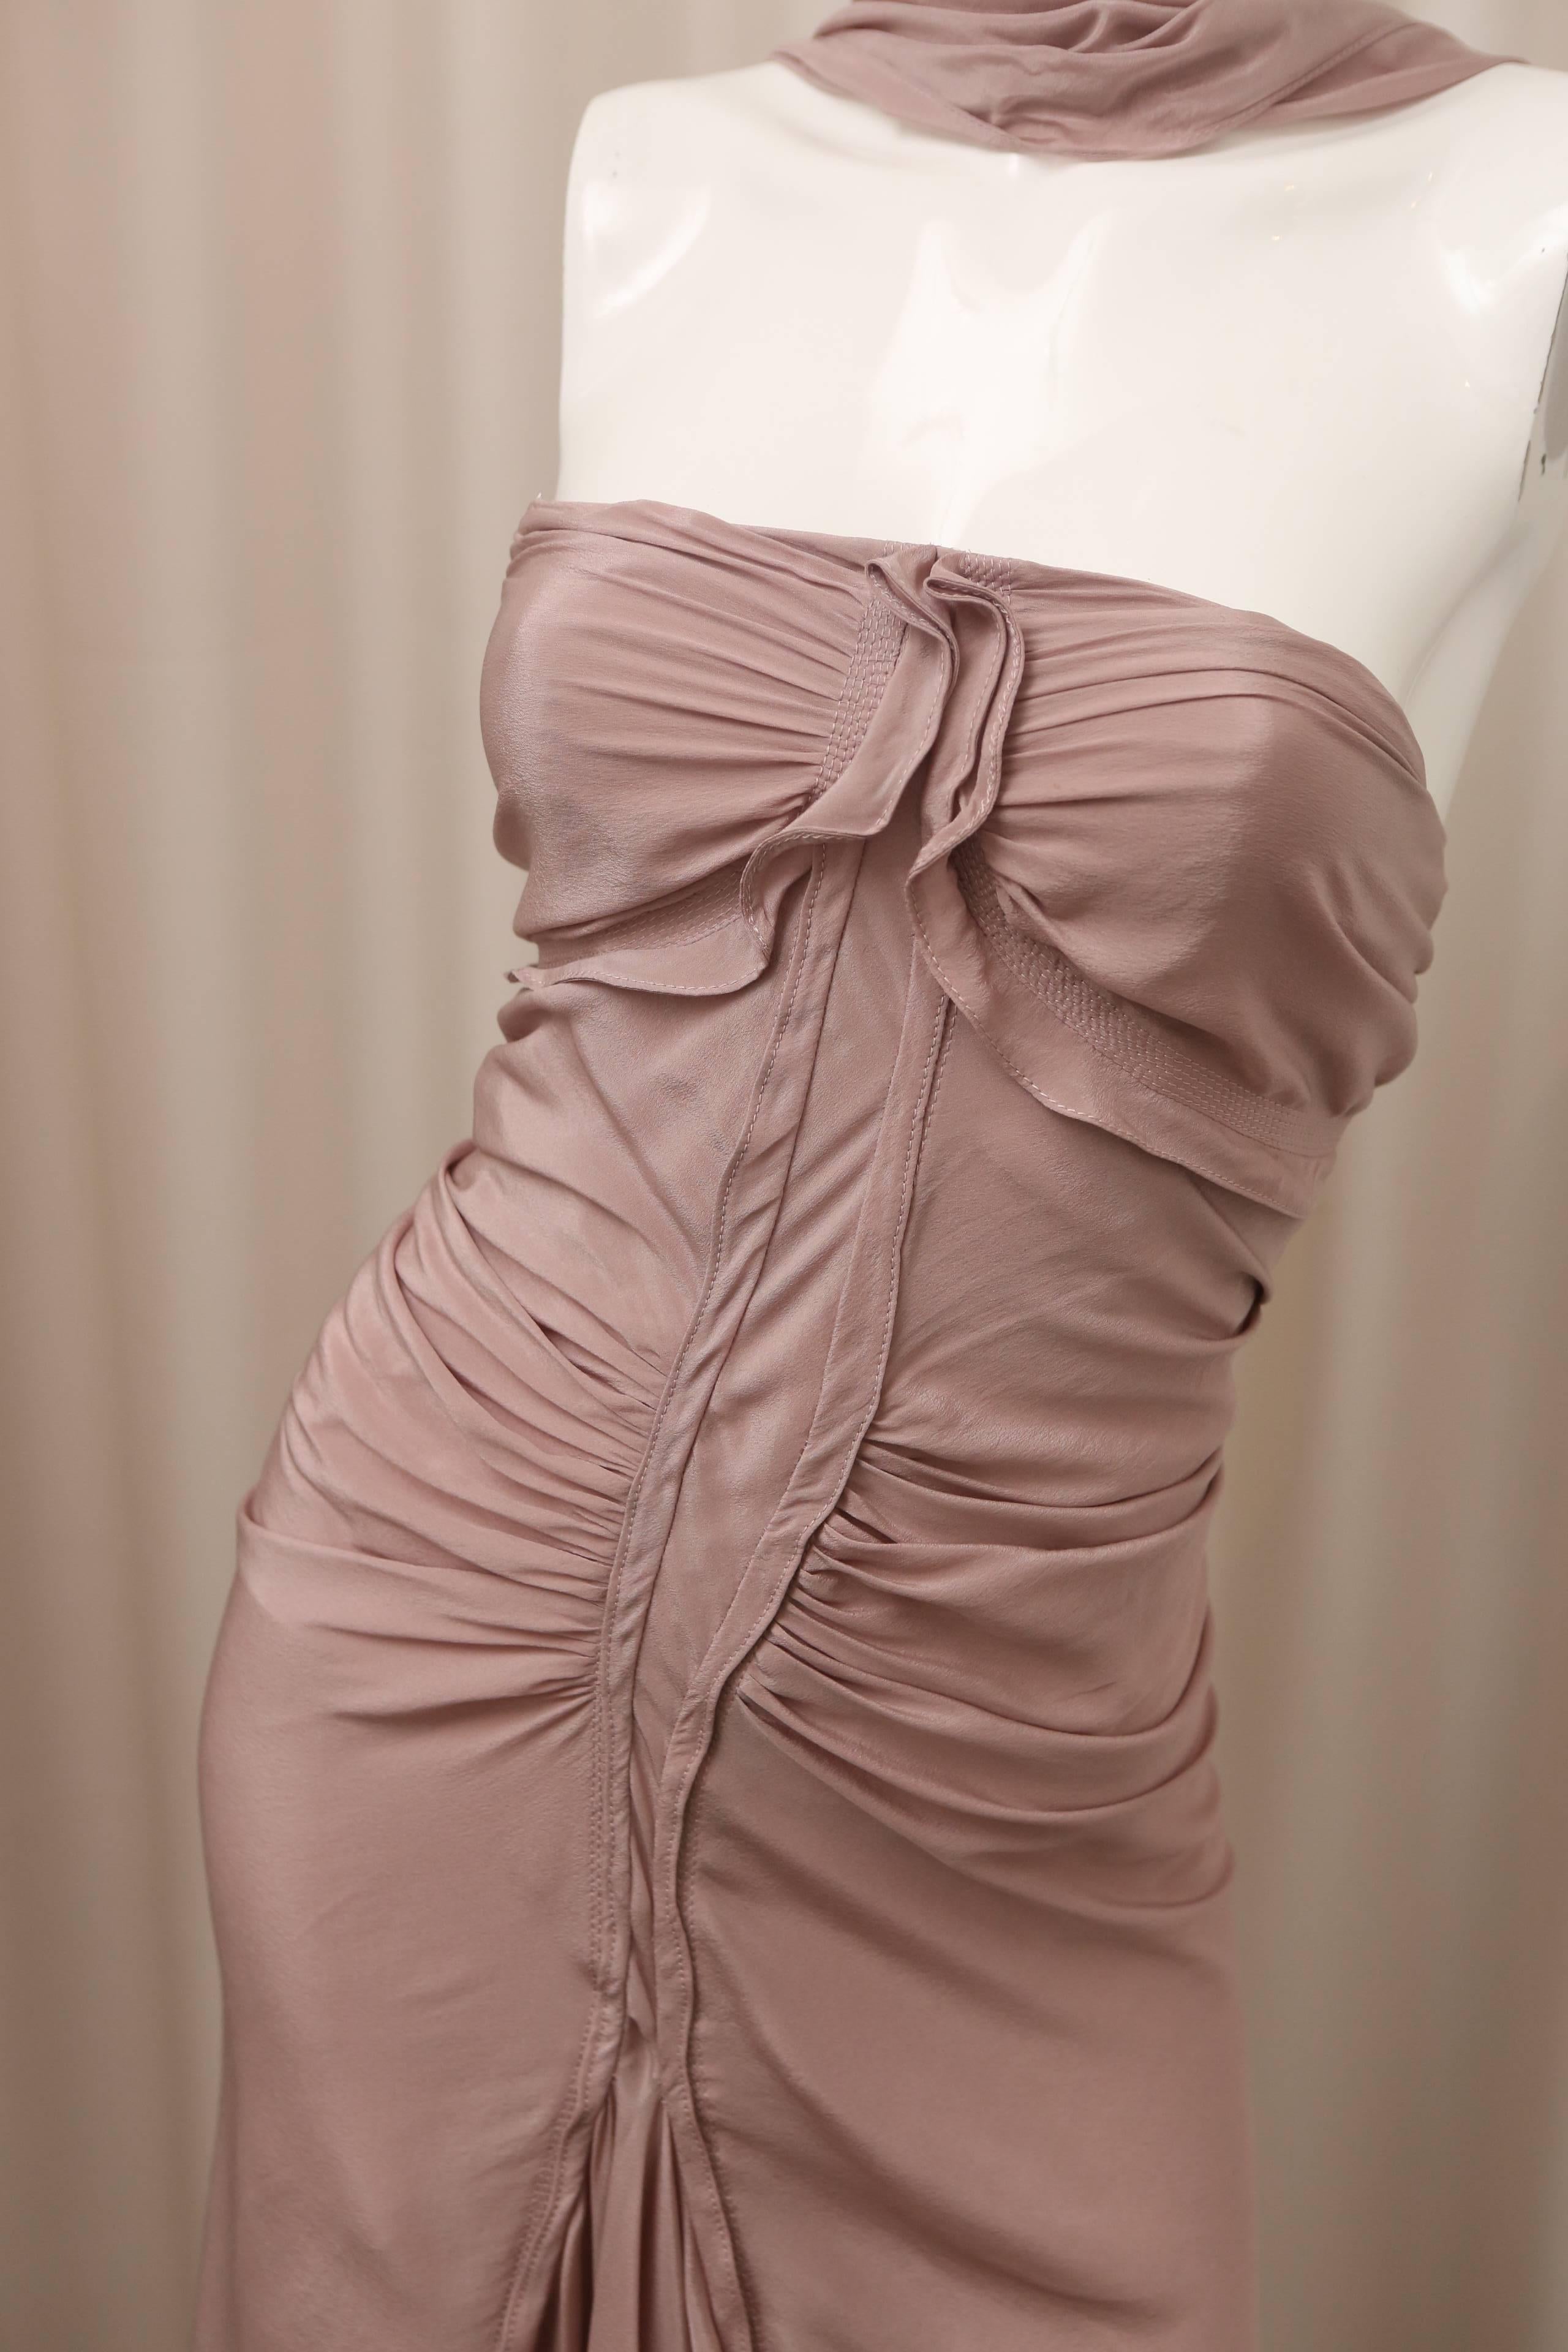 YSL blush s/l dress w/ front gathering and corseted bust.  Back zip closure.